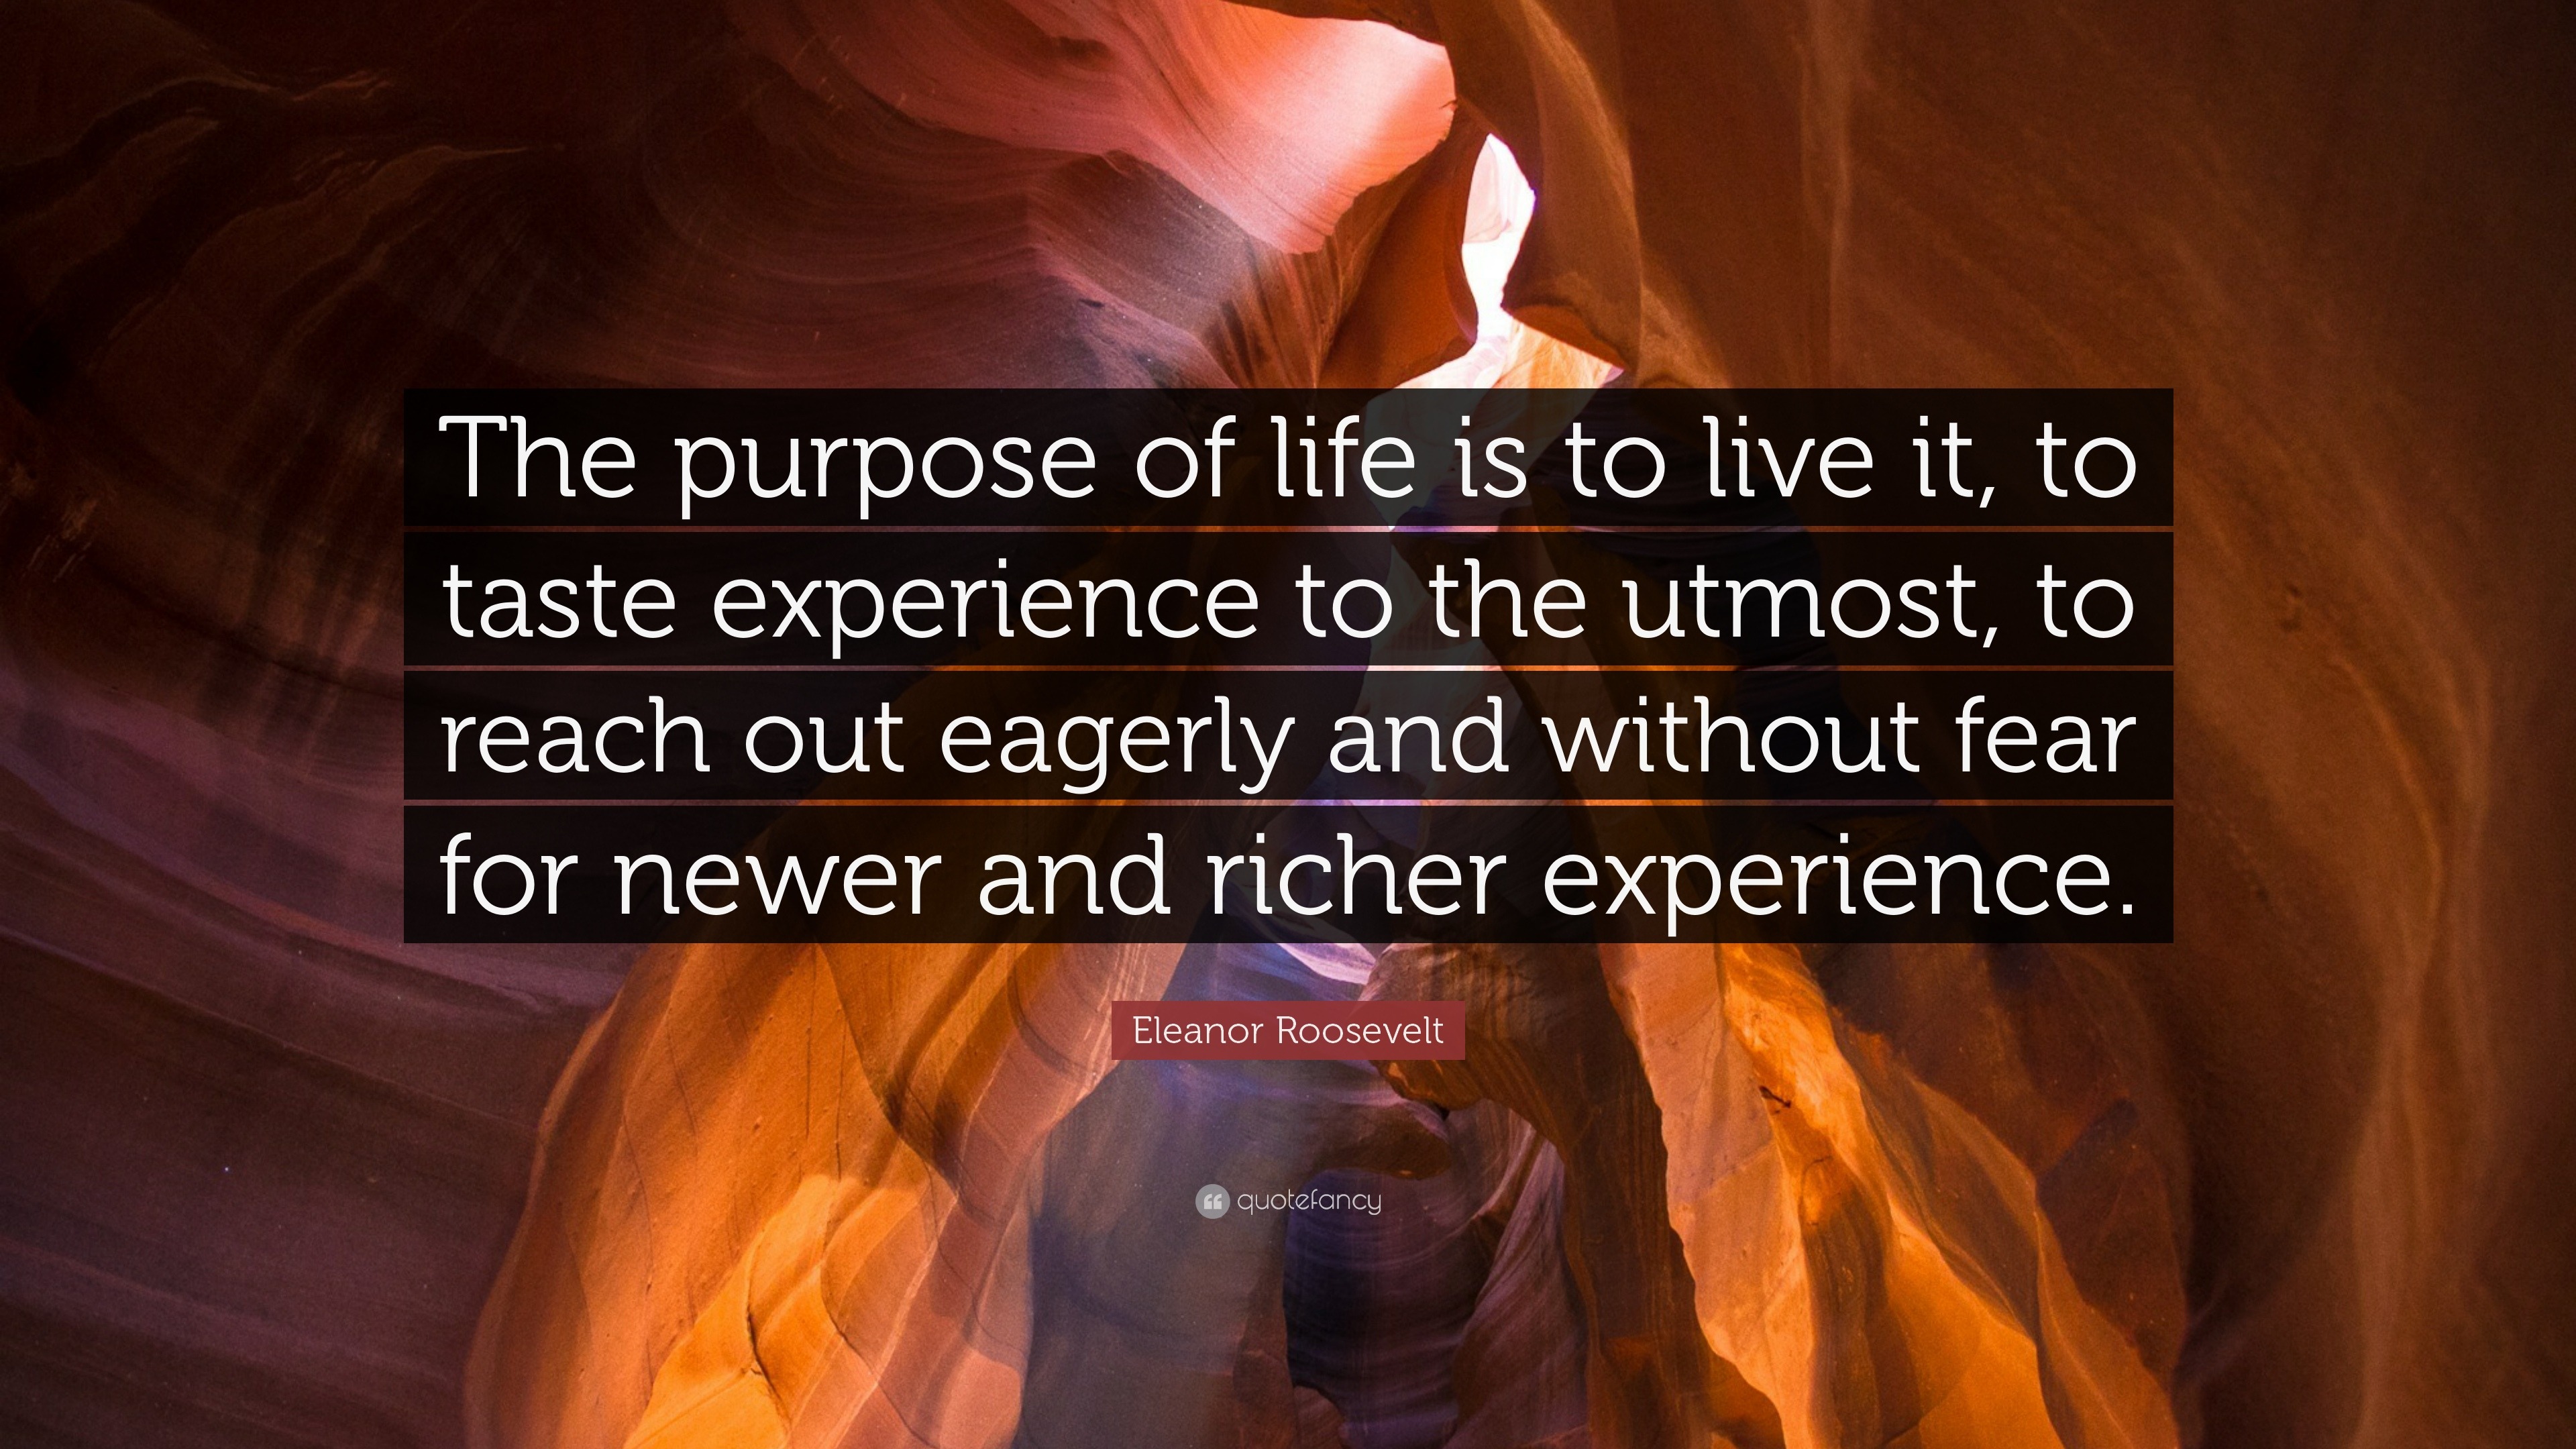 Eleanor Roosevelt Quote: “The purpose of life is to live it, to taste